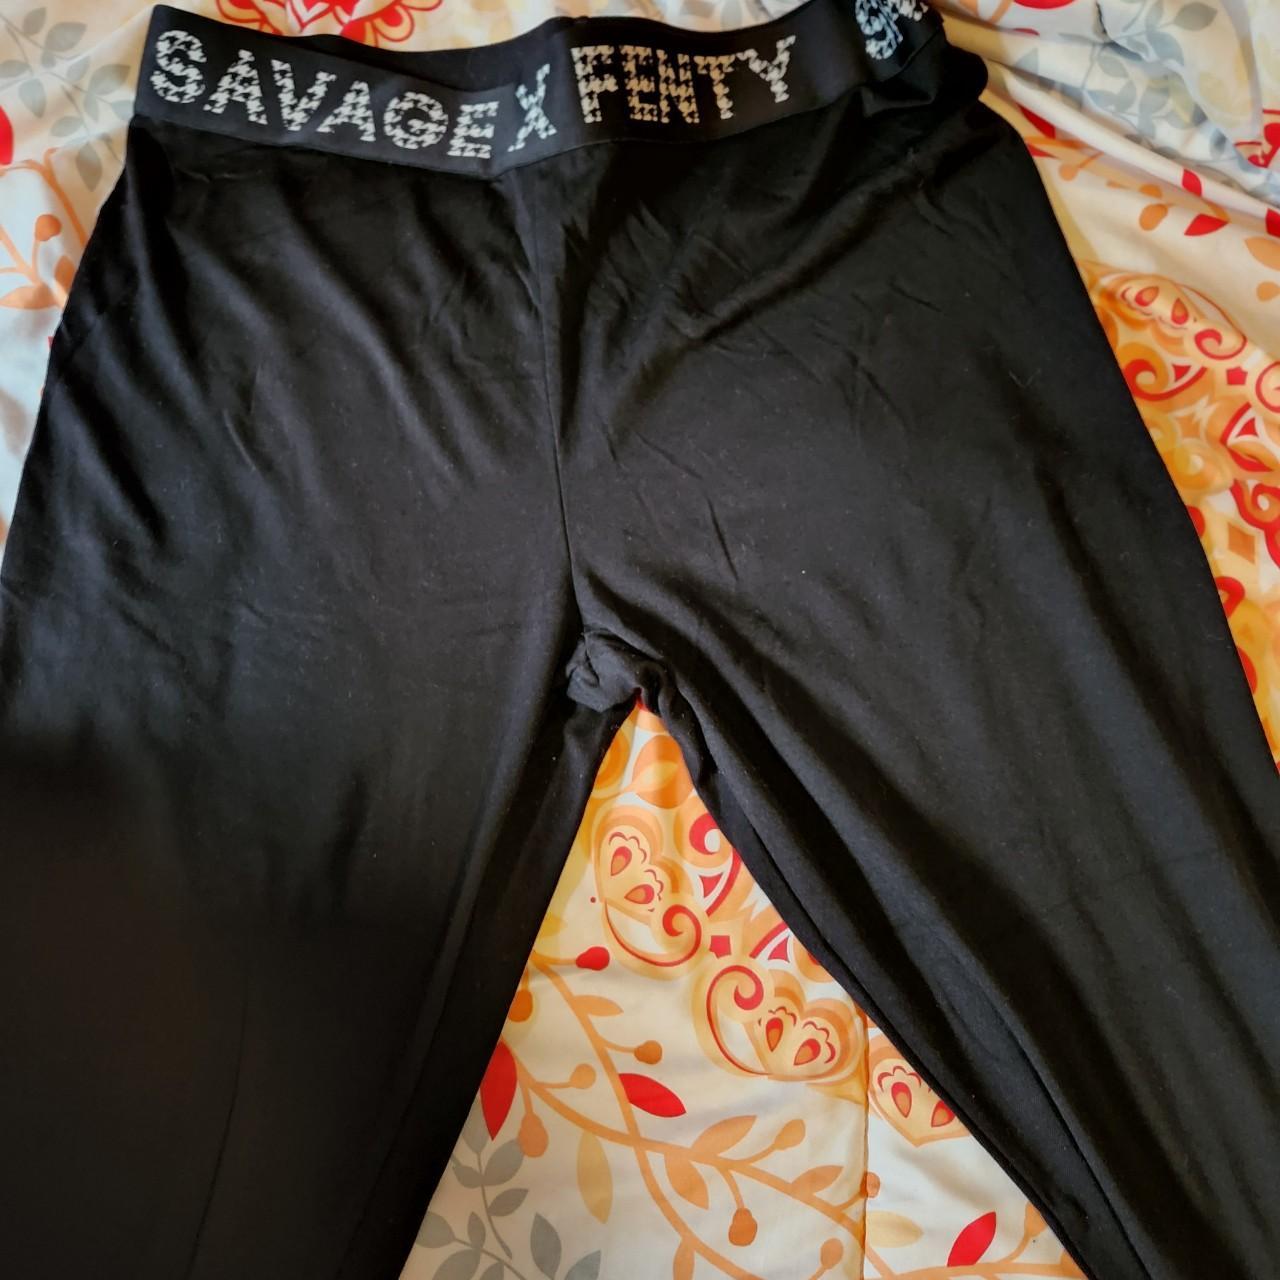 SAVAGE X FENTY LEGGINGS Size XL. Only worn once to - Depop